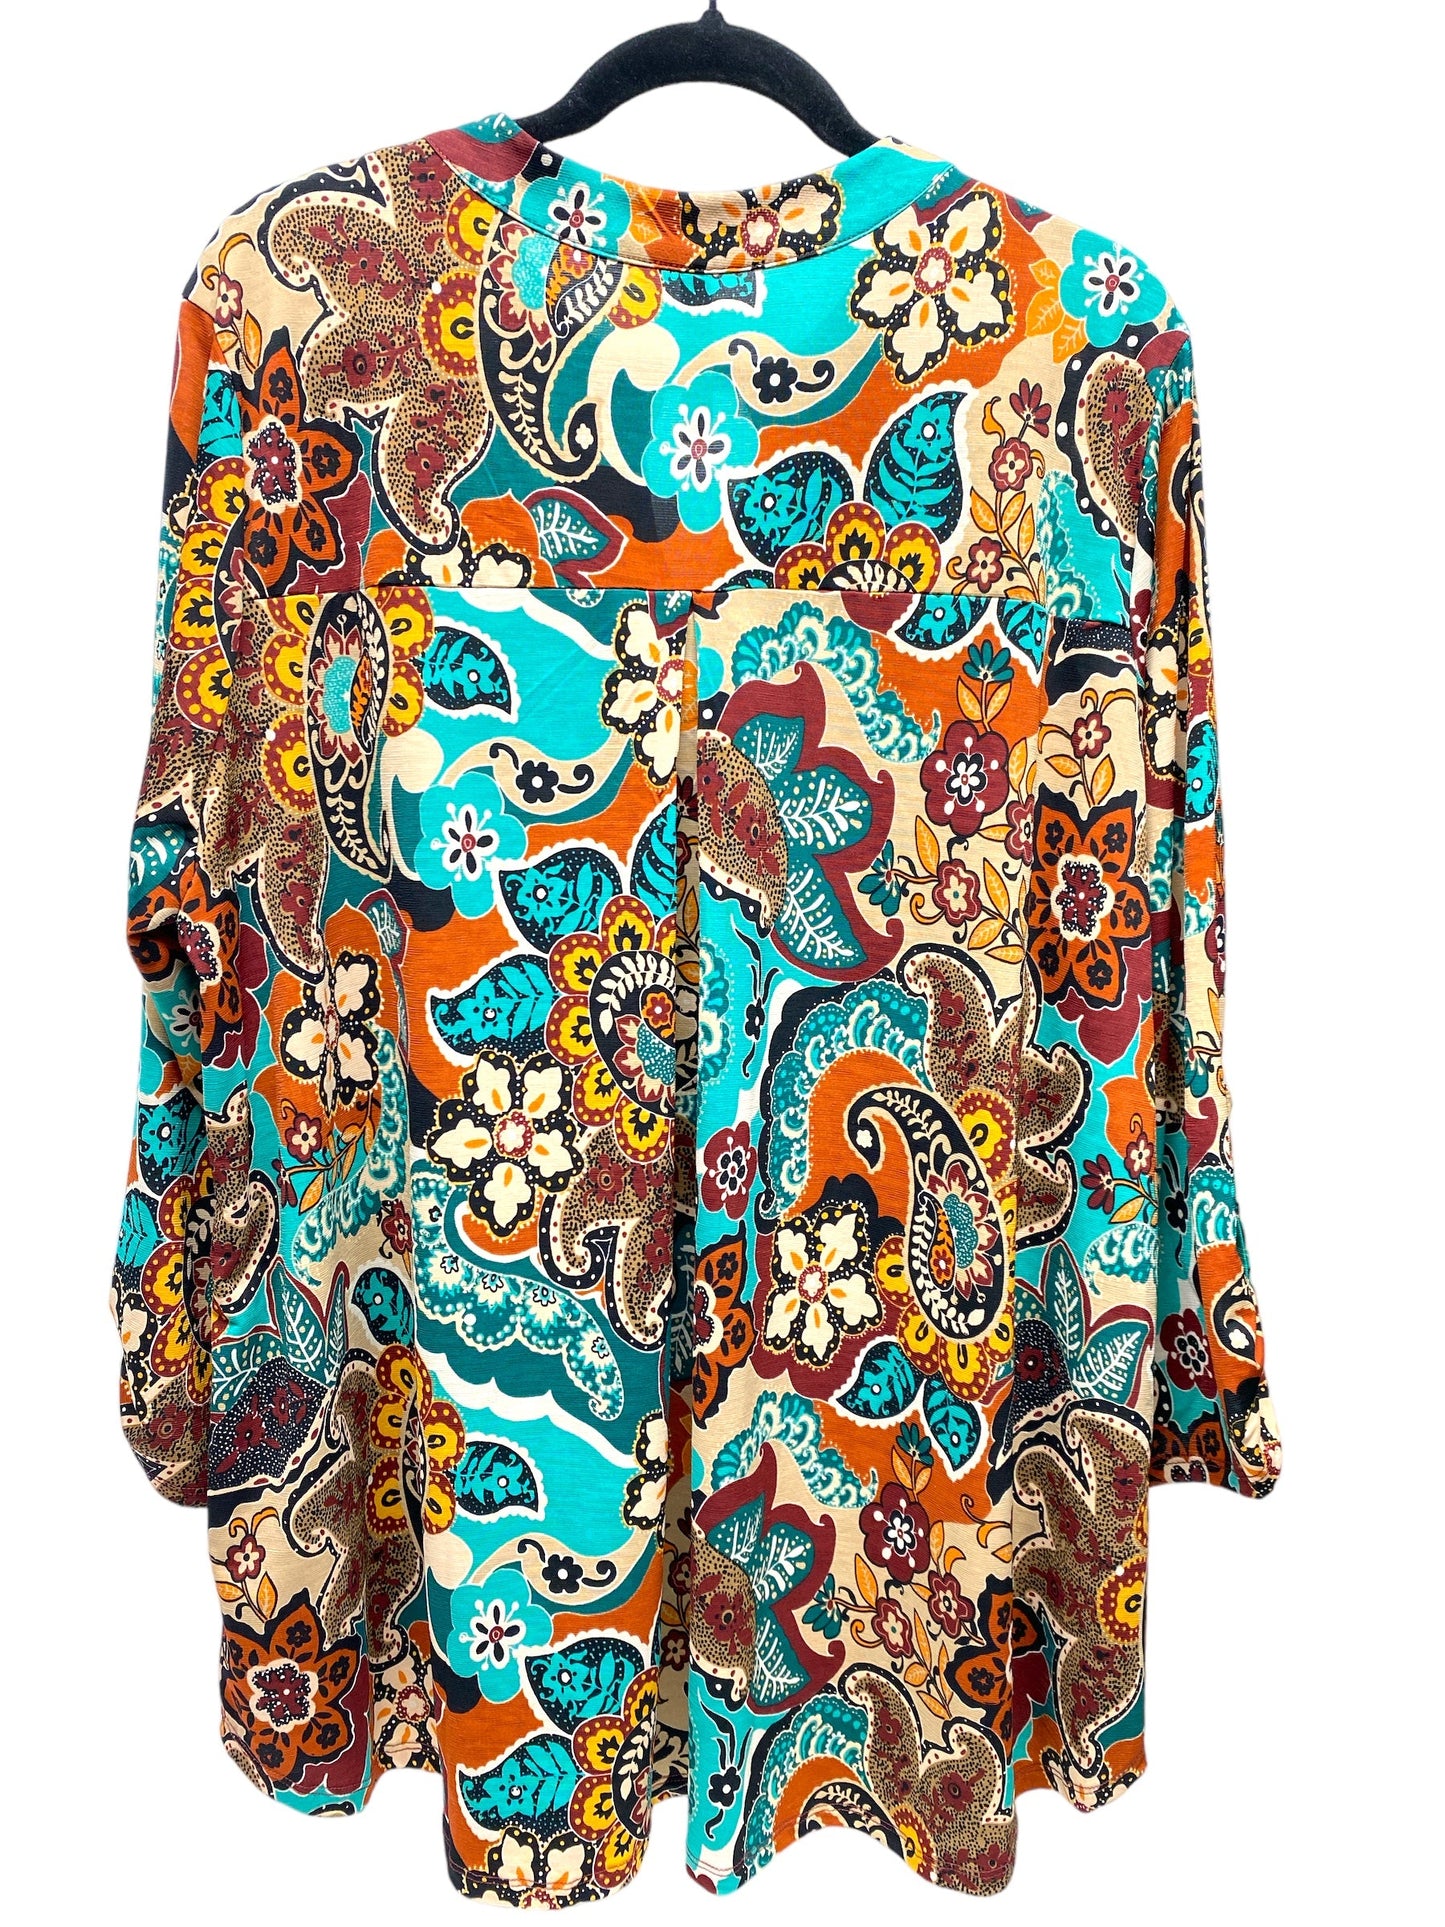 Paisley Print Top 3/4 Sleeve Clothes Mentor, Size 3x